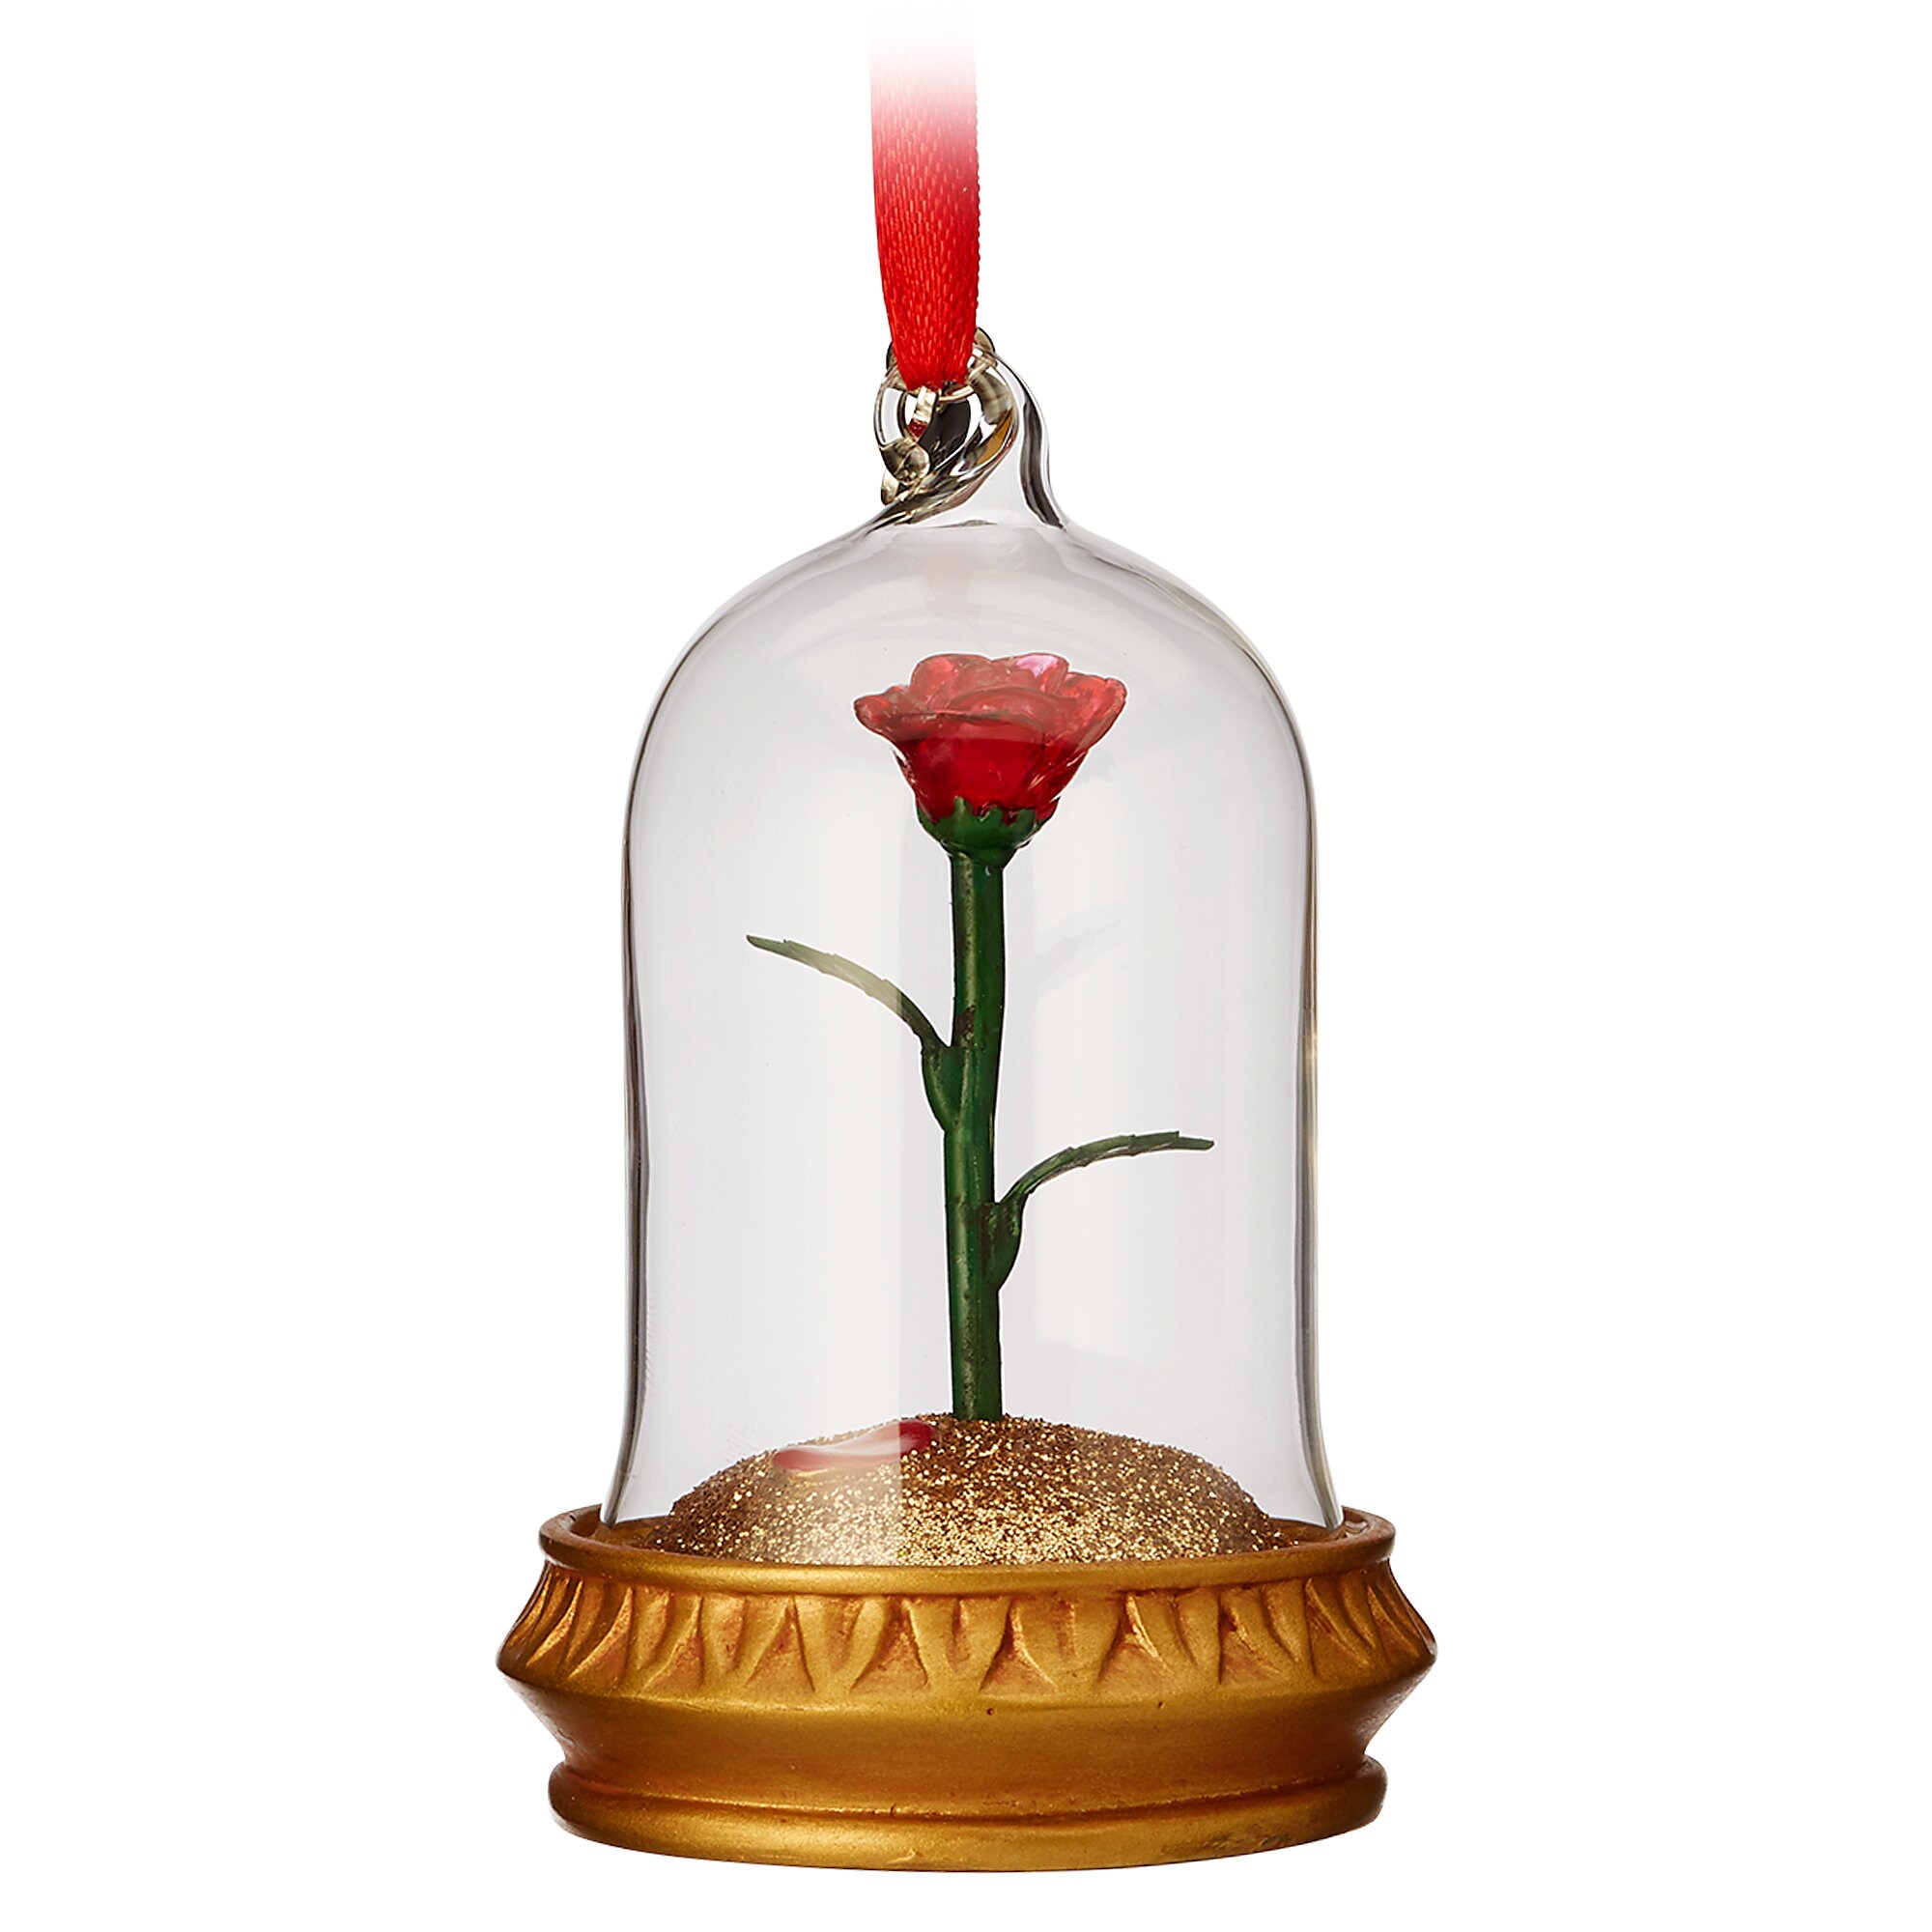 Enchanted Rose Light-Up Sketchbook Ornament - Beauty and the Beast